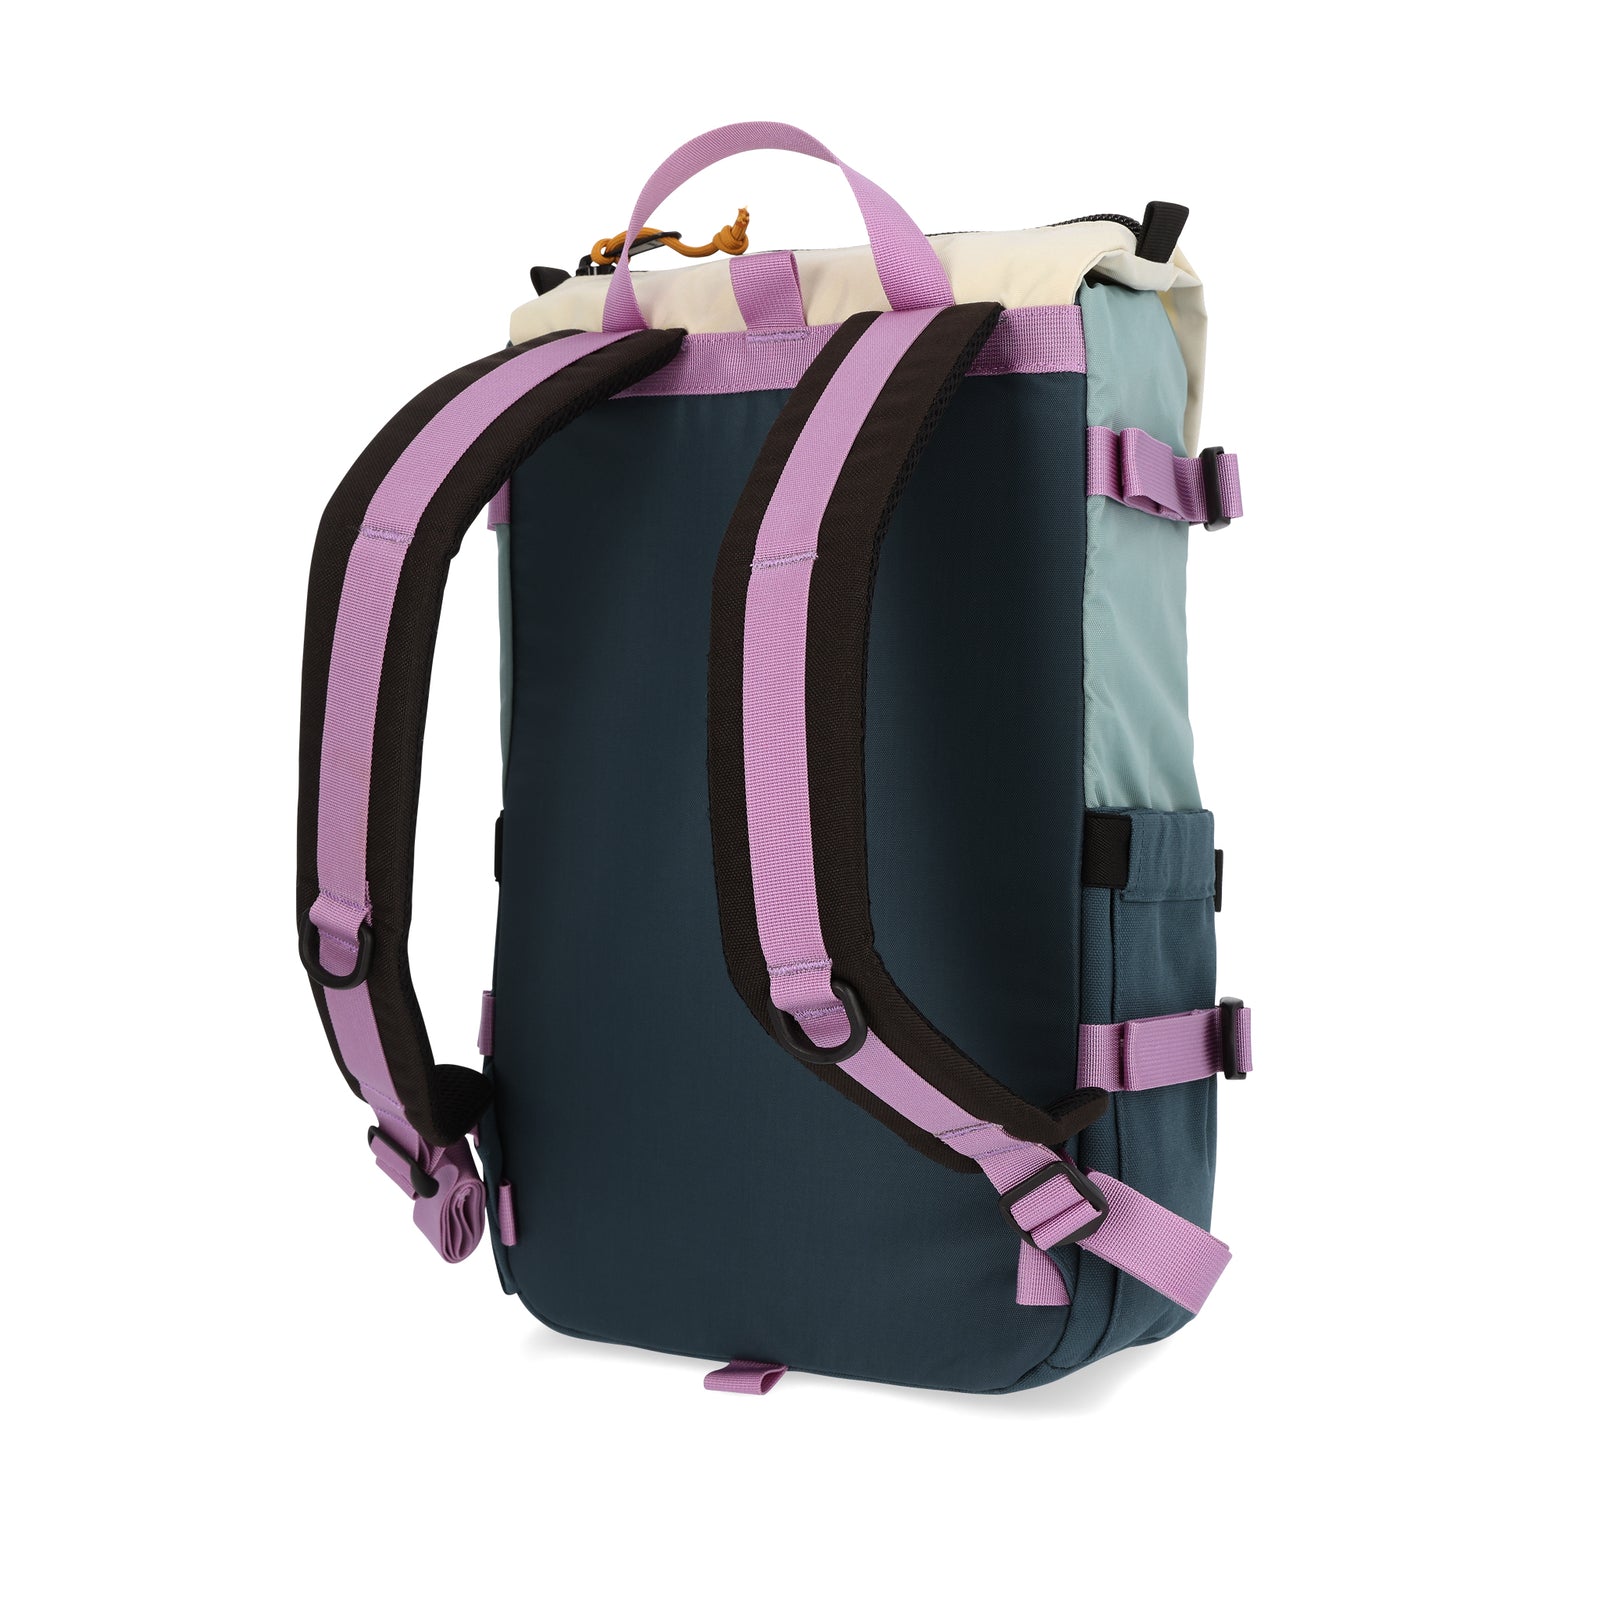 Topo Designs Rover Pack Classic laptop backpack in "Sage / Pond Blue".